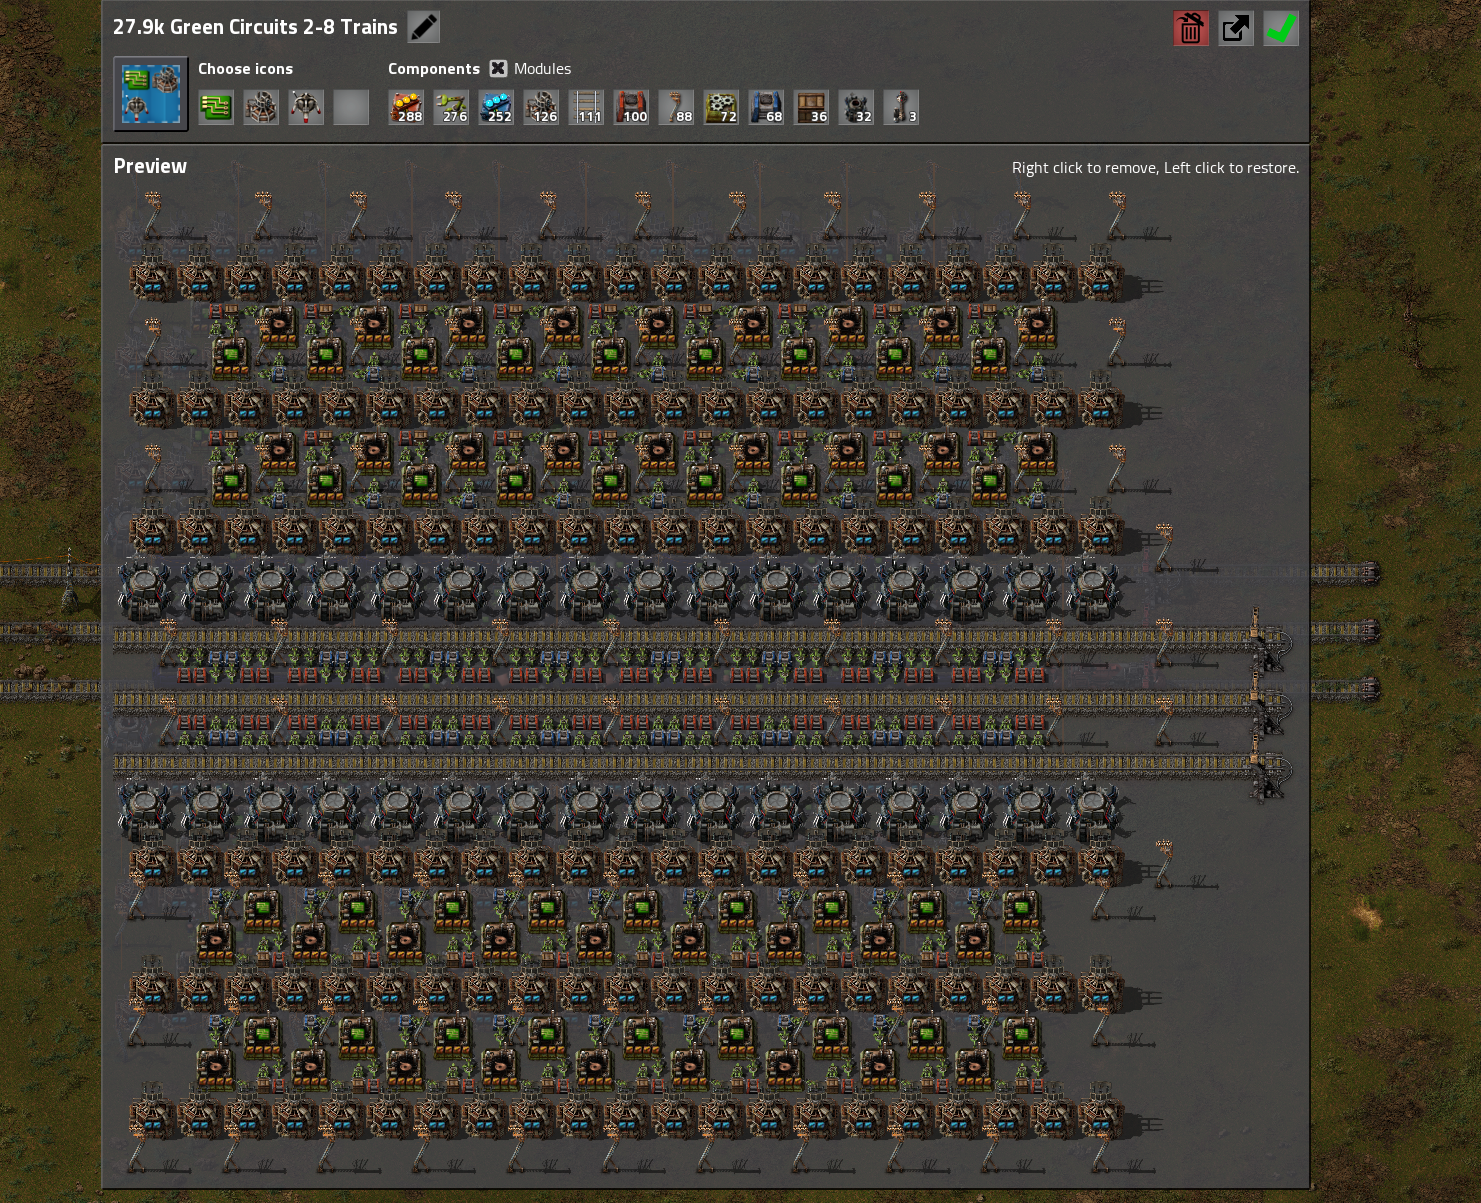 This needs about 15 blue belts worth of iron and copper, and produces over 10 belts worth of green circuits. Yet there is no room to squeeze those belts into the build.